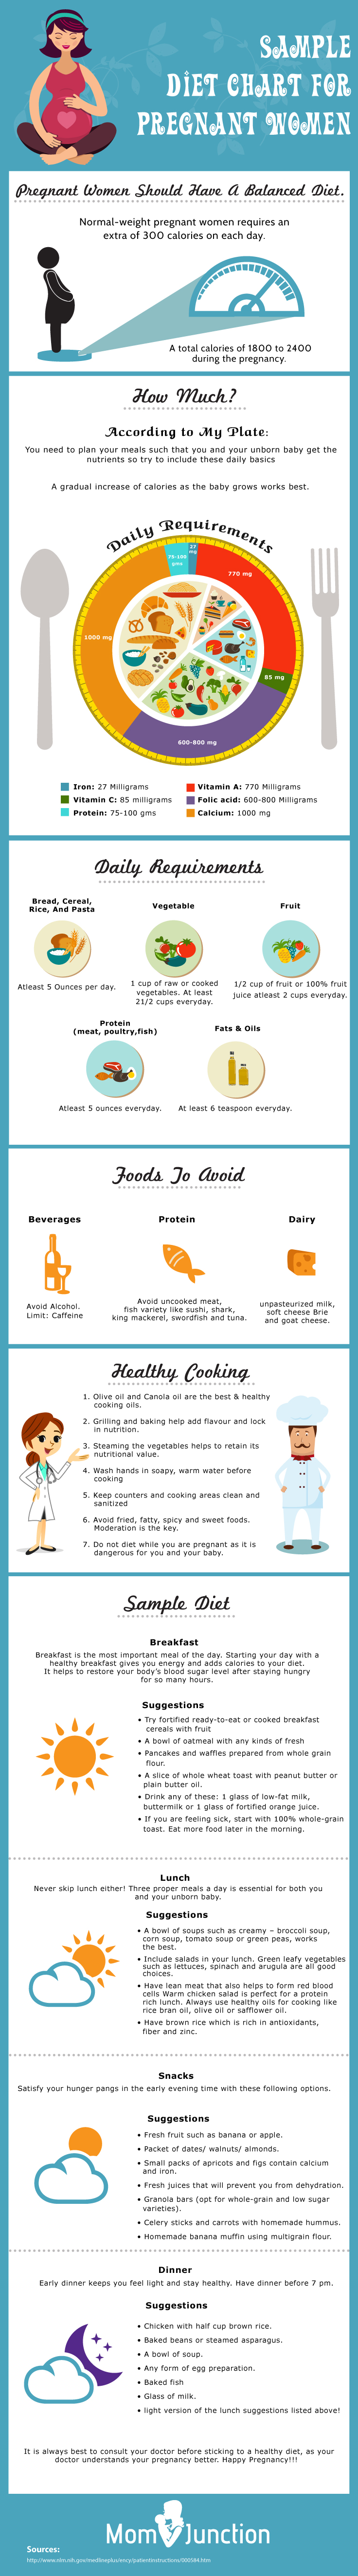 Here Is A Sample Diet Chart For Pregnant Women